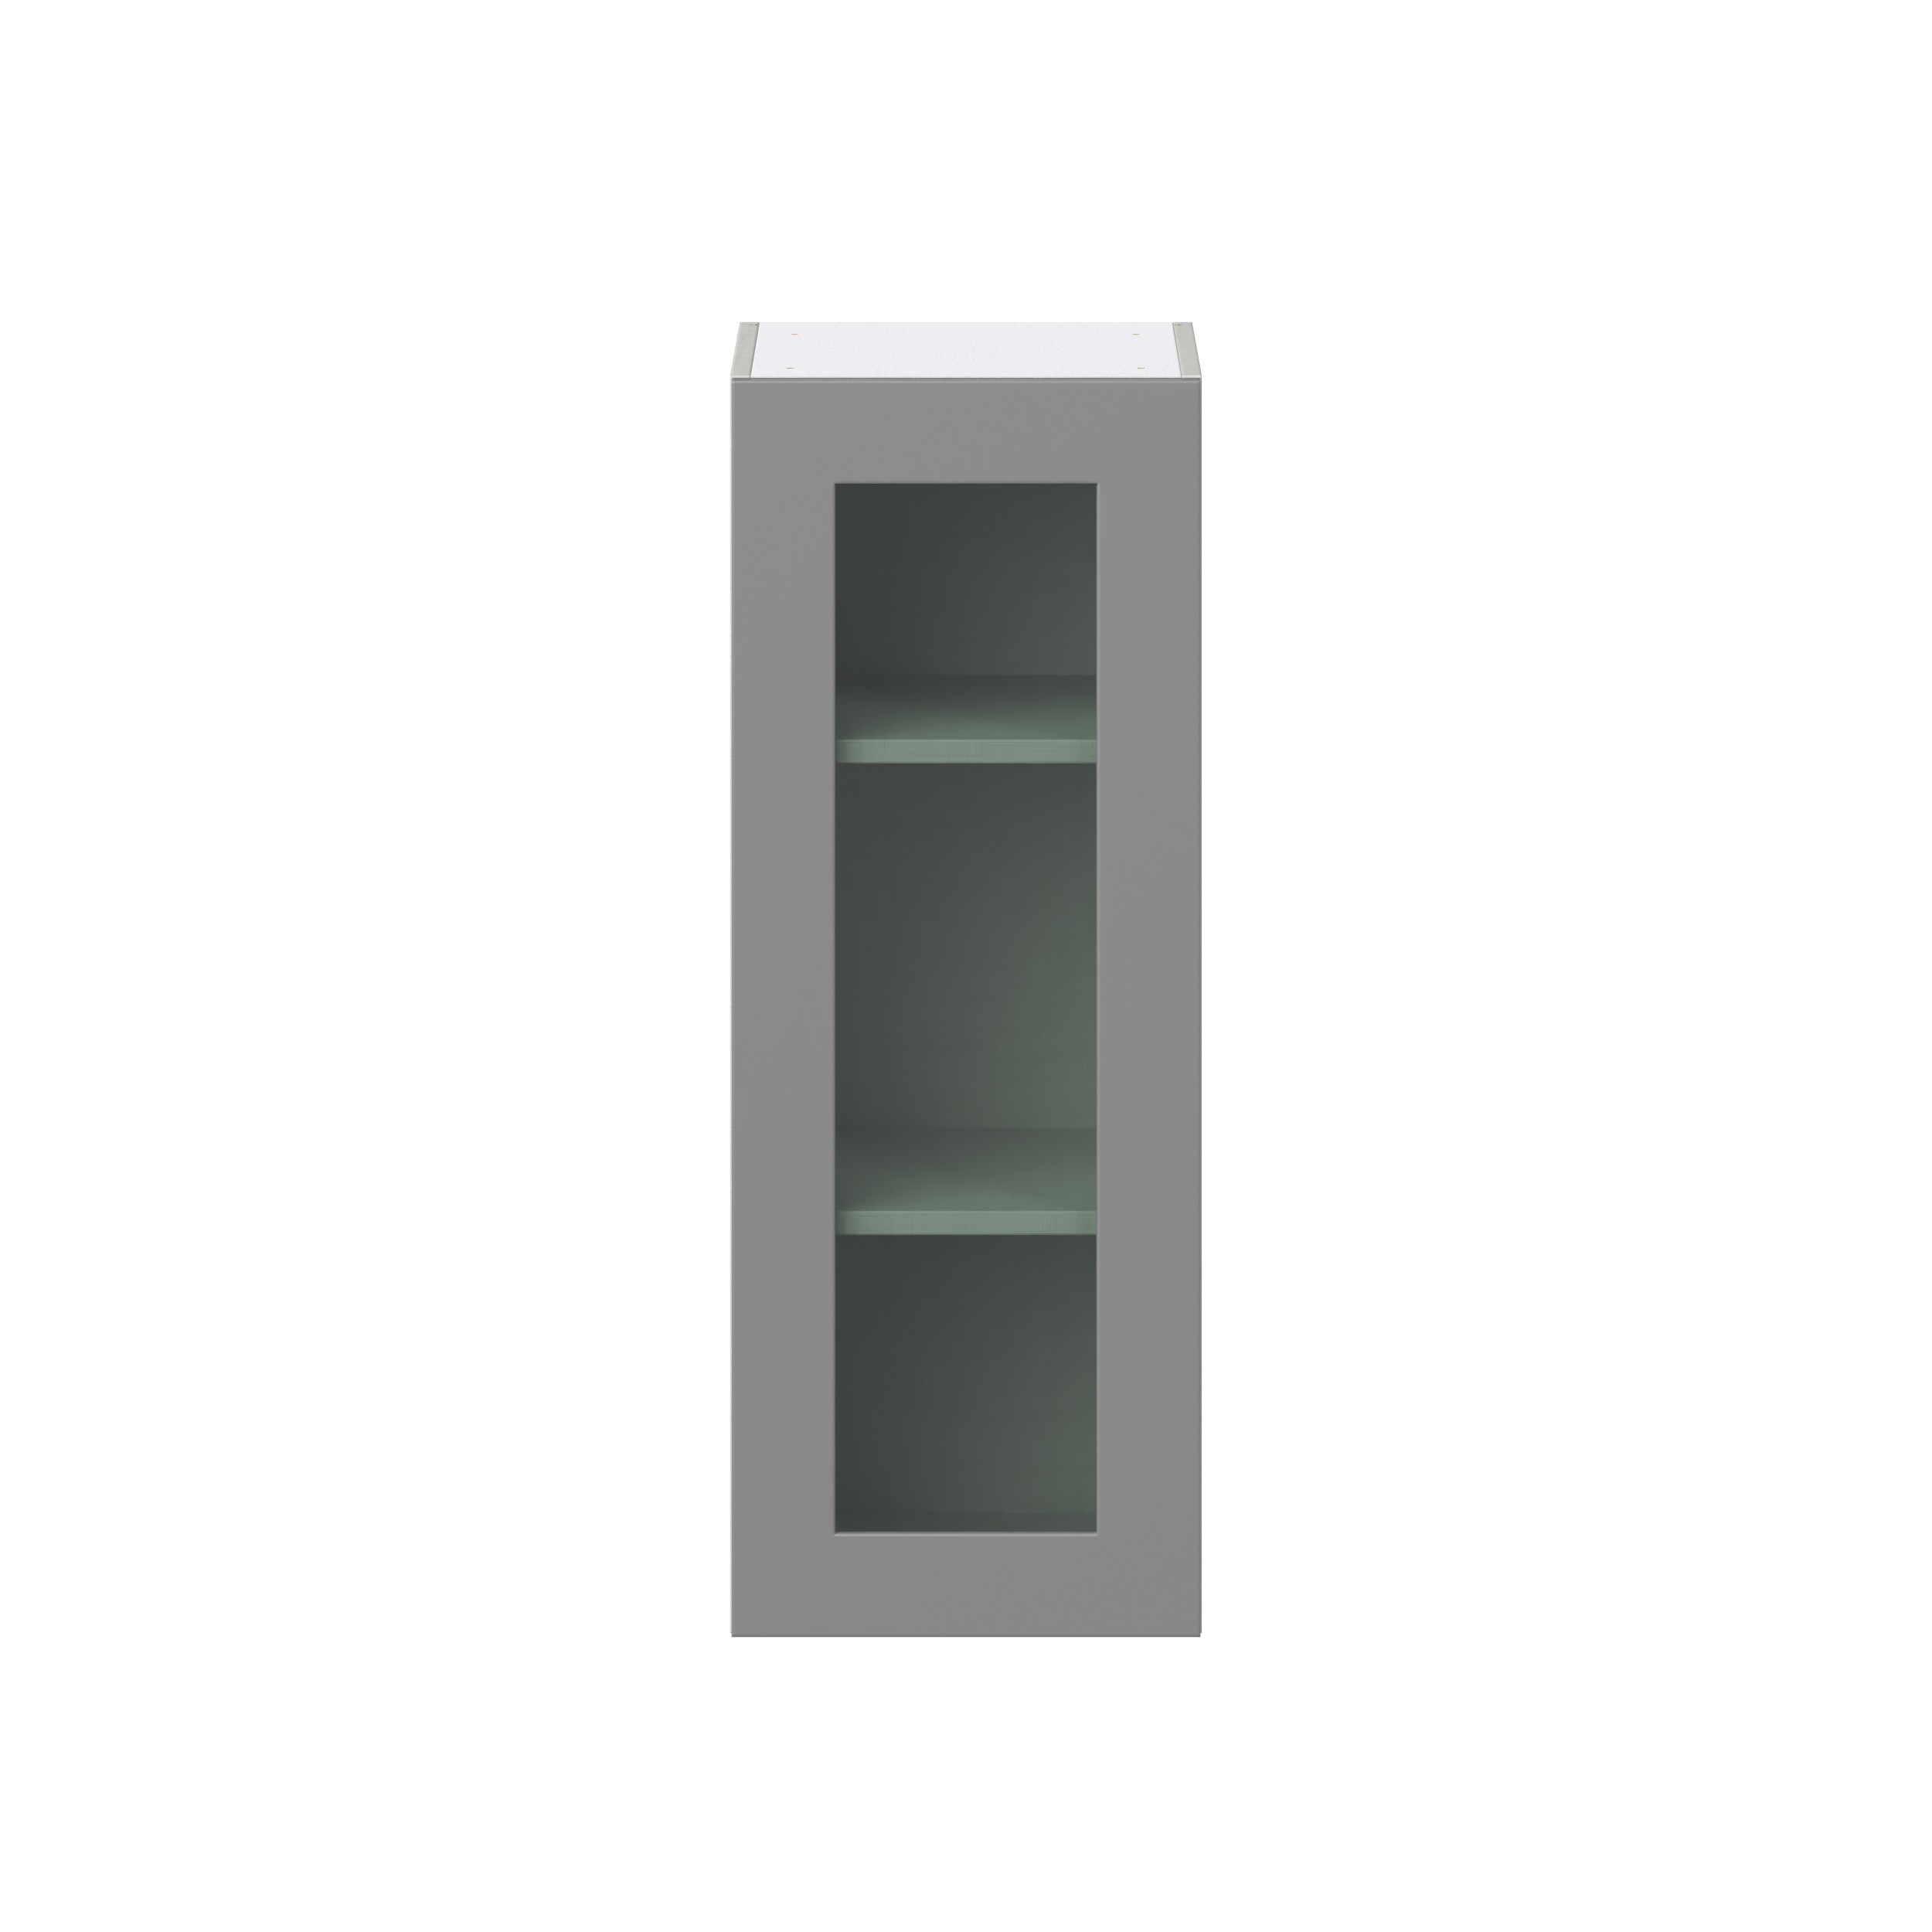 Willow Painted Slate Gray Shaker Assembled Wall Cabinet with a Full High Glass Door (15 in. W x 40 in. H x 14 in. D)